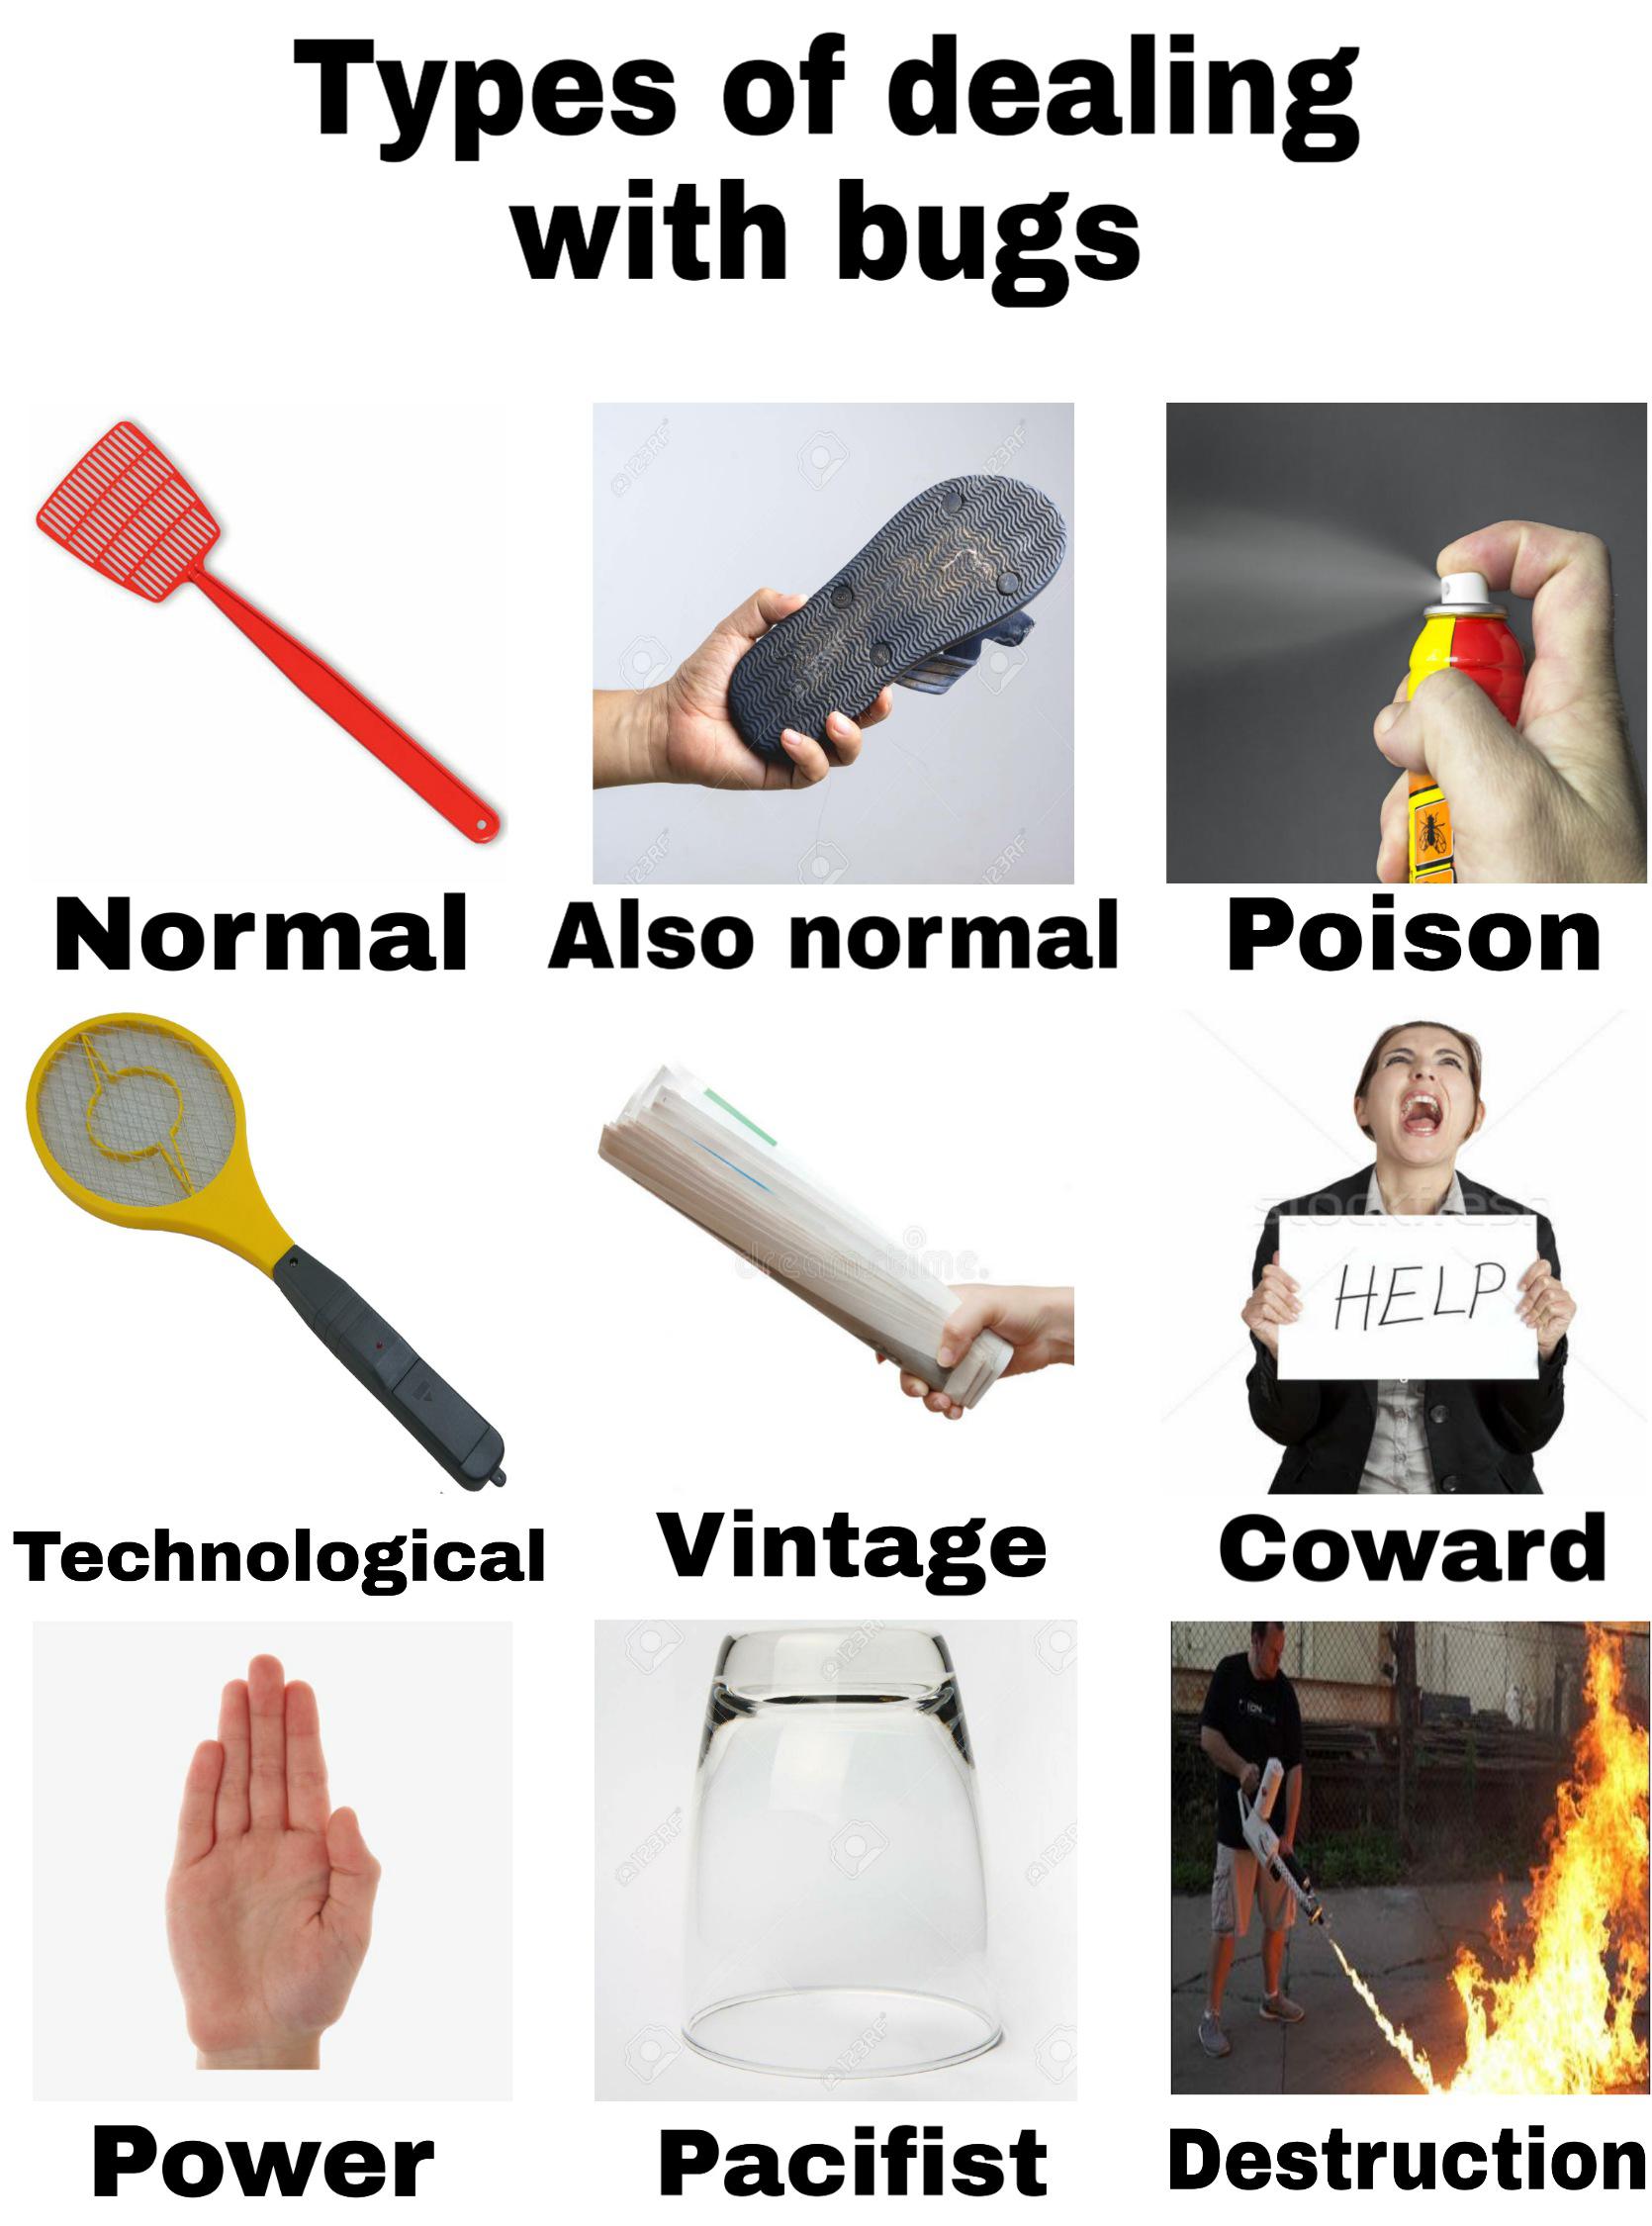 dank memes - hand - Types of dealing with bugs 23RF 23RF Normal Also normal Poison Help Technological Vintage Coward 01230 123RF 01234 Debrf Power Pacifist Destruction